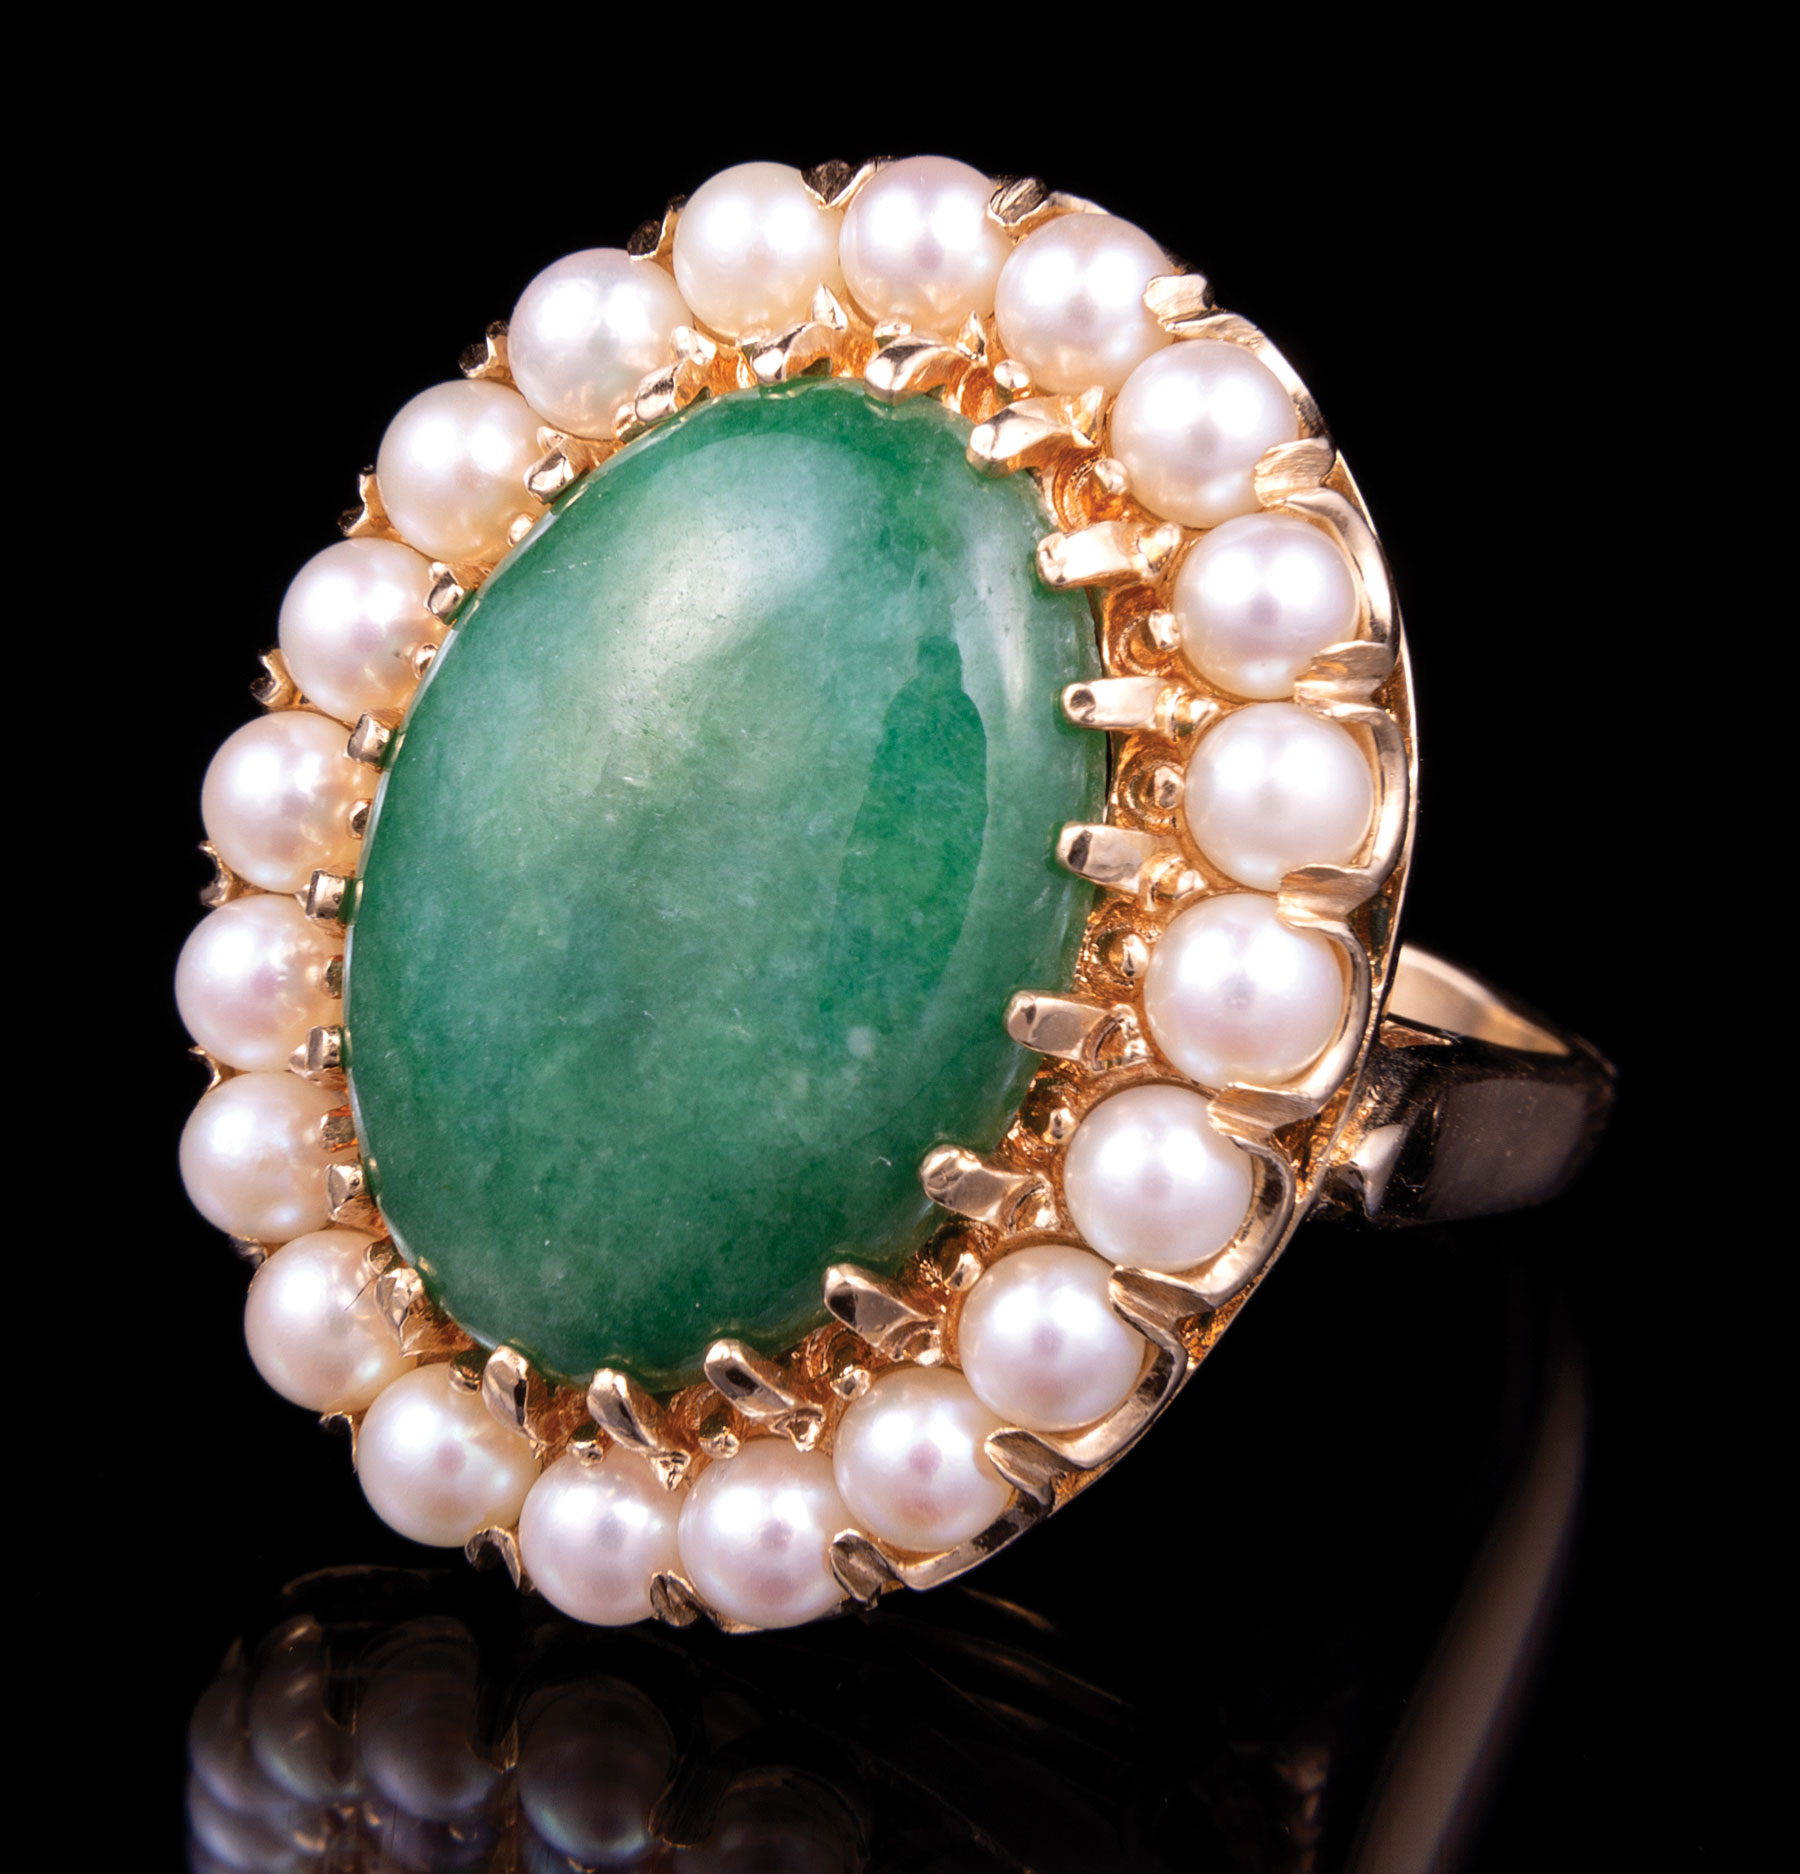 14 kt. Yellow Gold, Jadeite and Pearl Ring , prong set oval cabochon jadeite, (20.00 x 14.00) 4.20